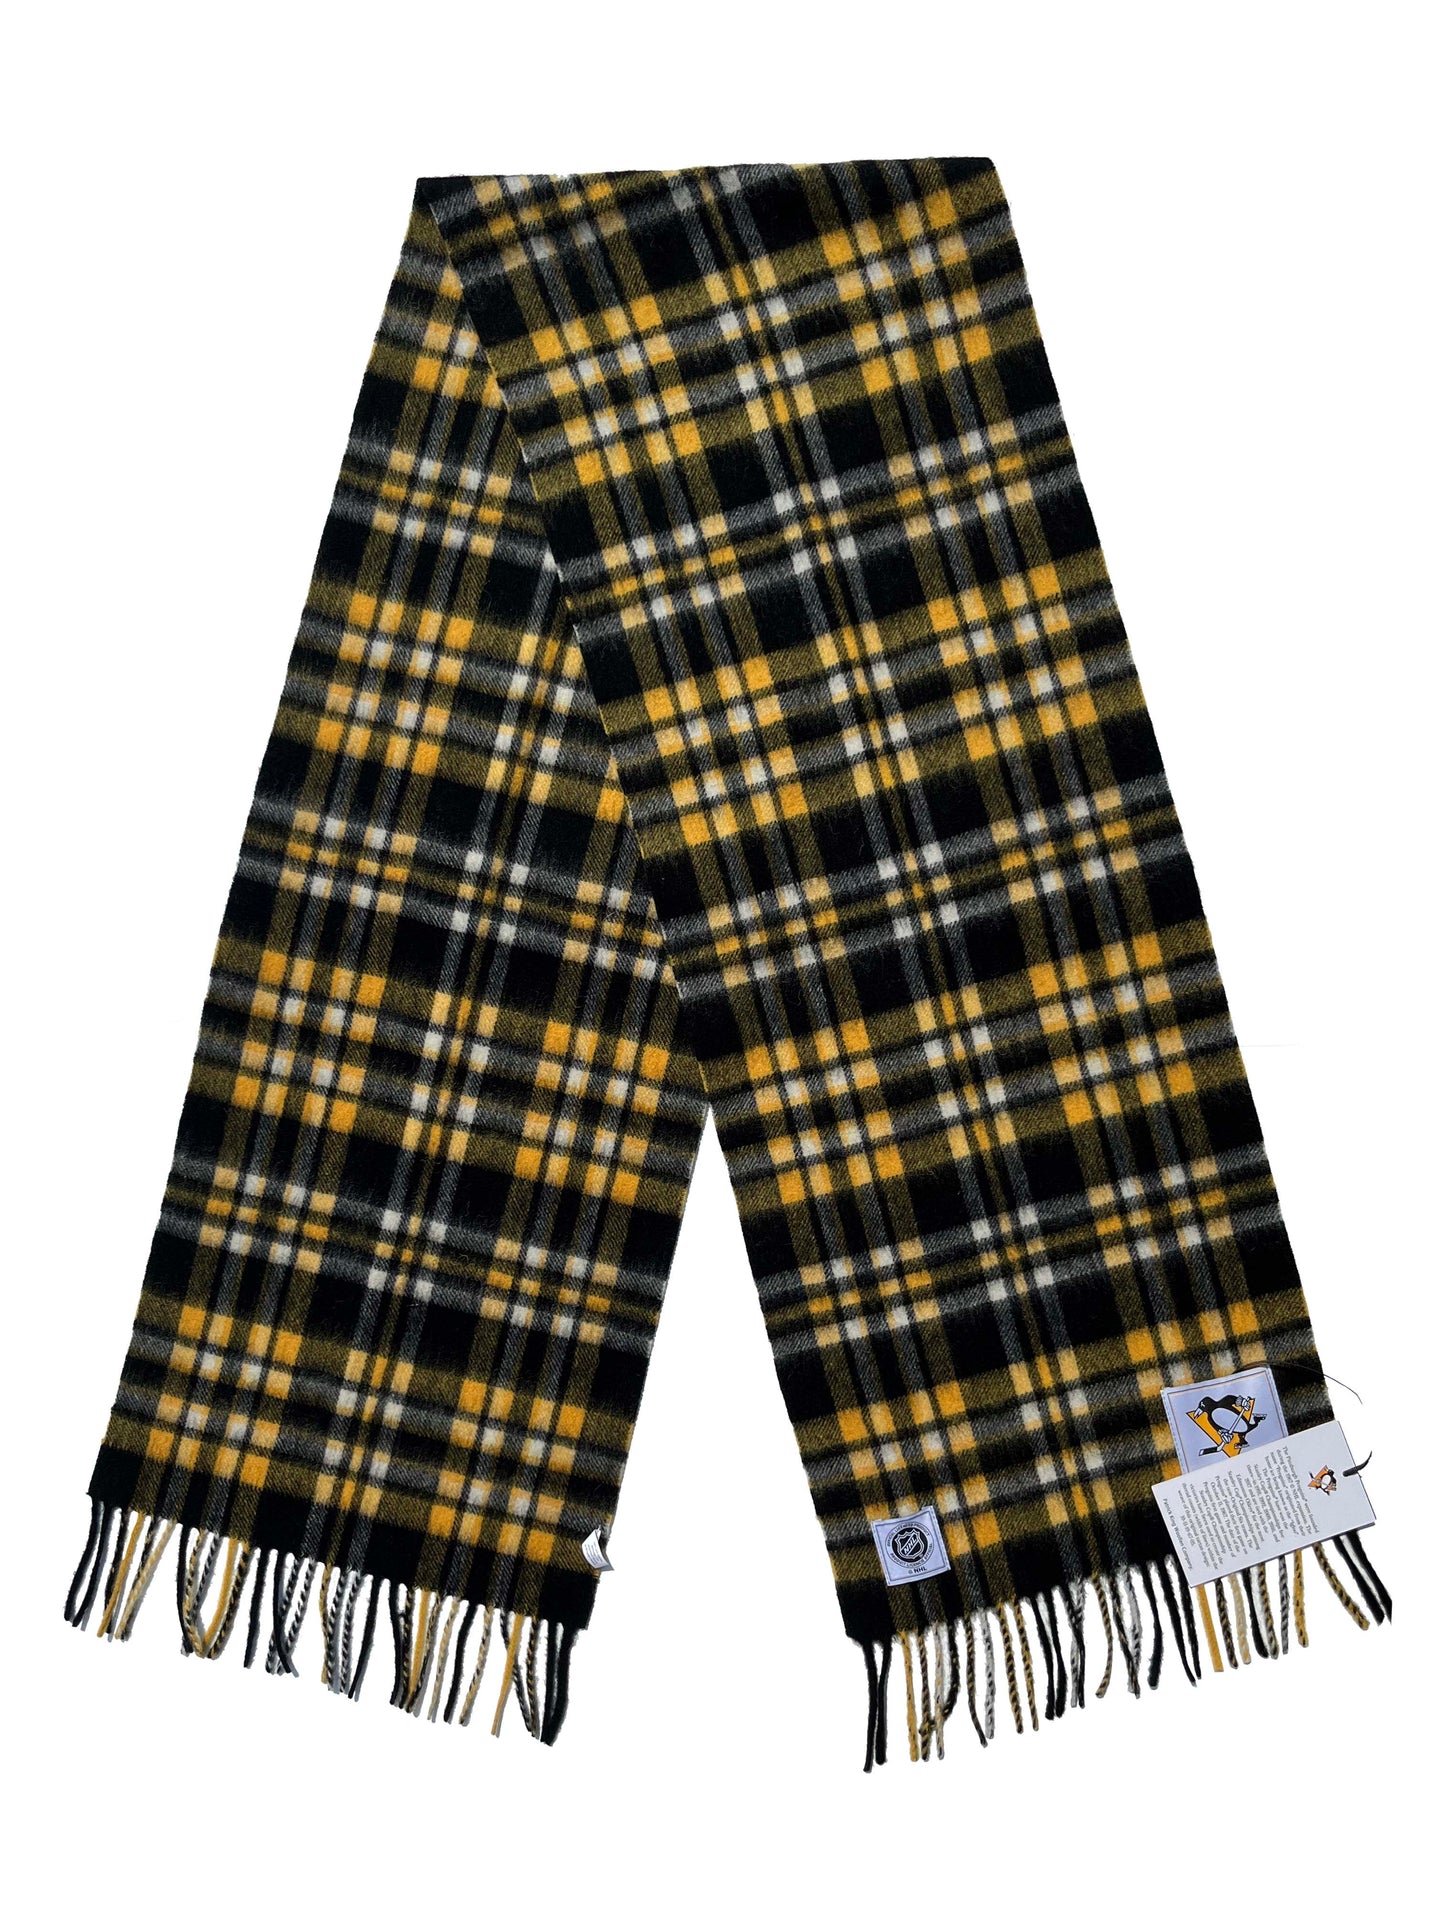 NHL Lambswool Scarf Pittsburgh Penguins